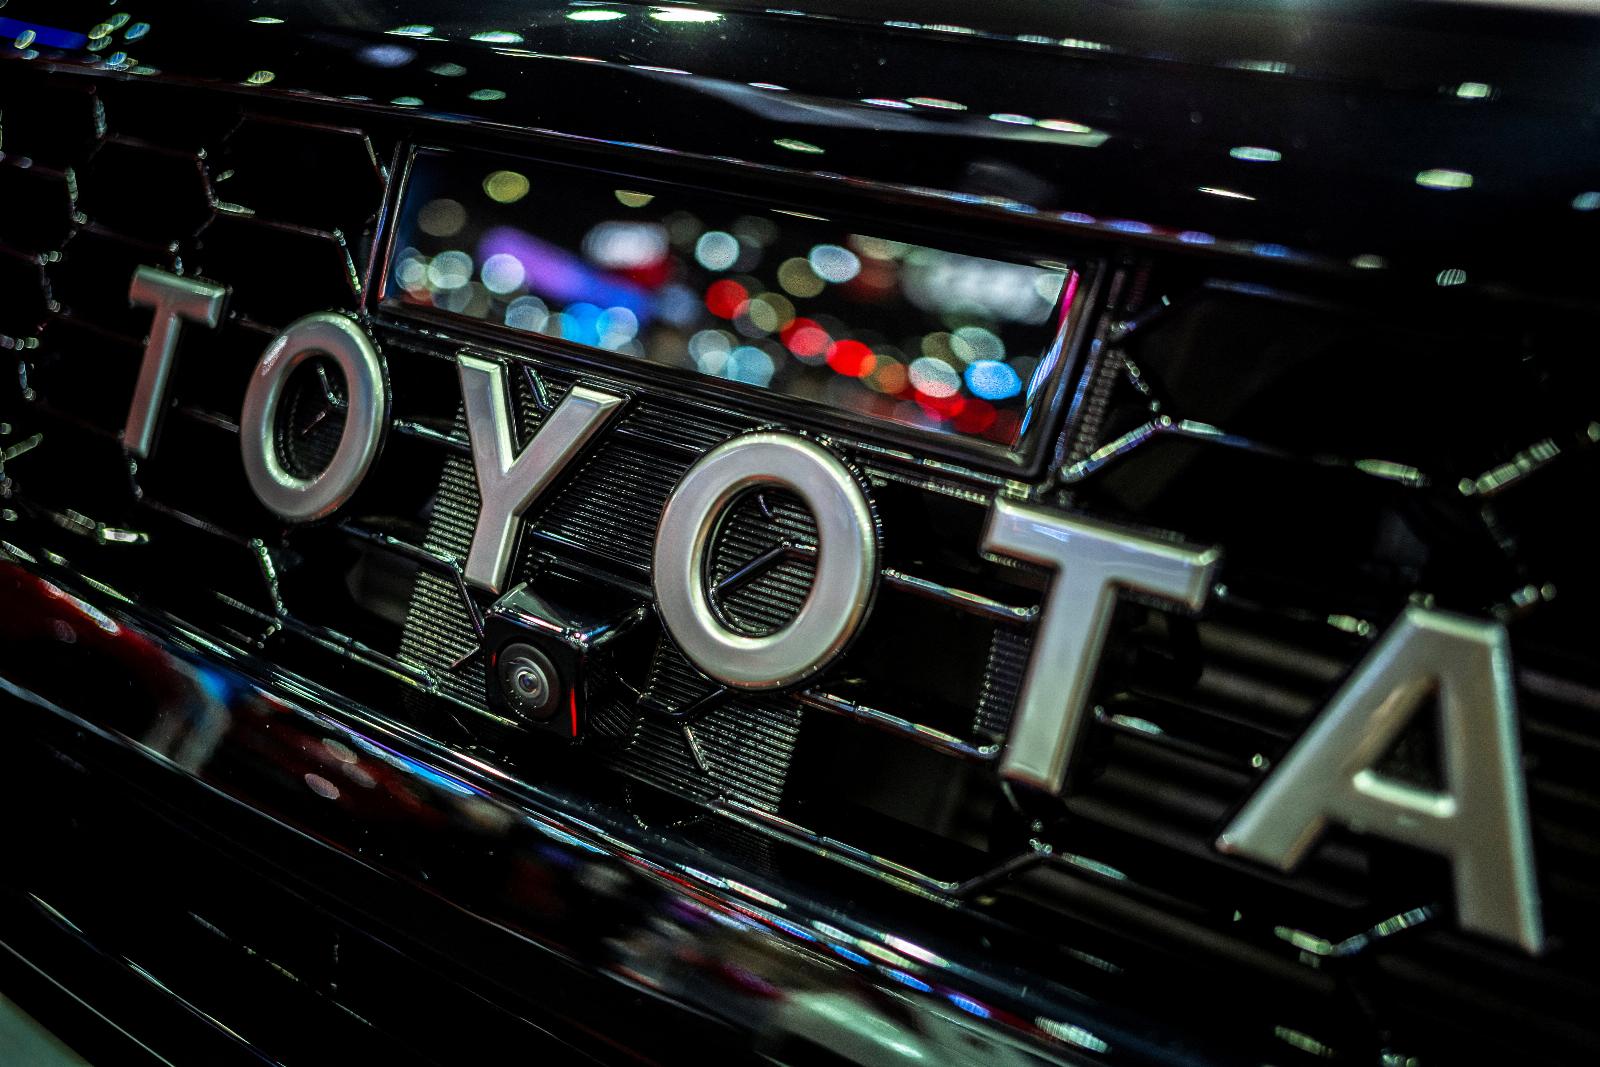 Why Toyota Would Put a Fake Stick Shift and Fake Engine Noises in an Electric Car